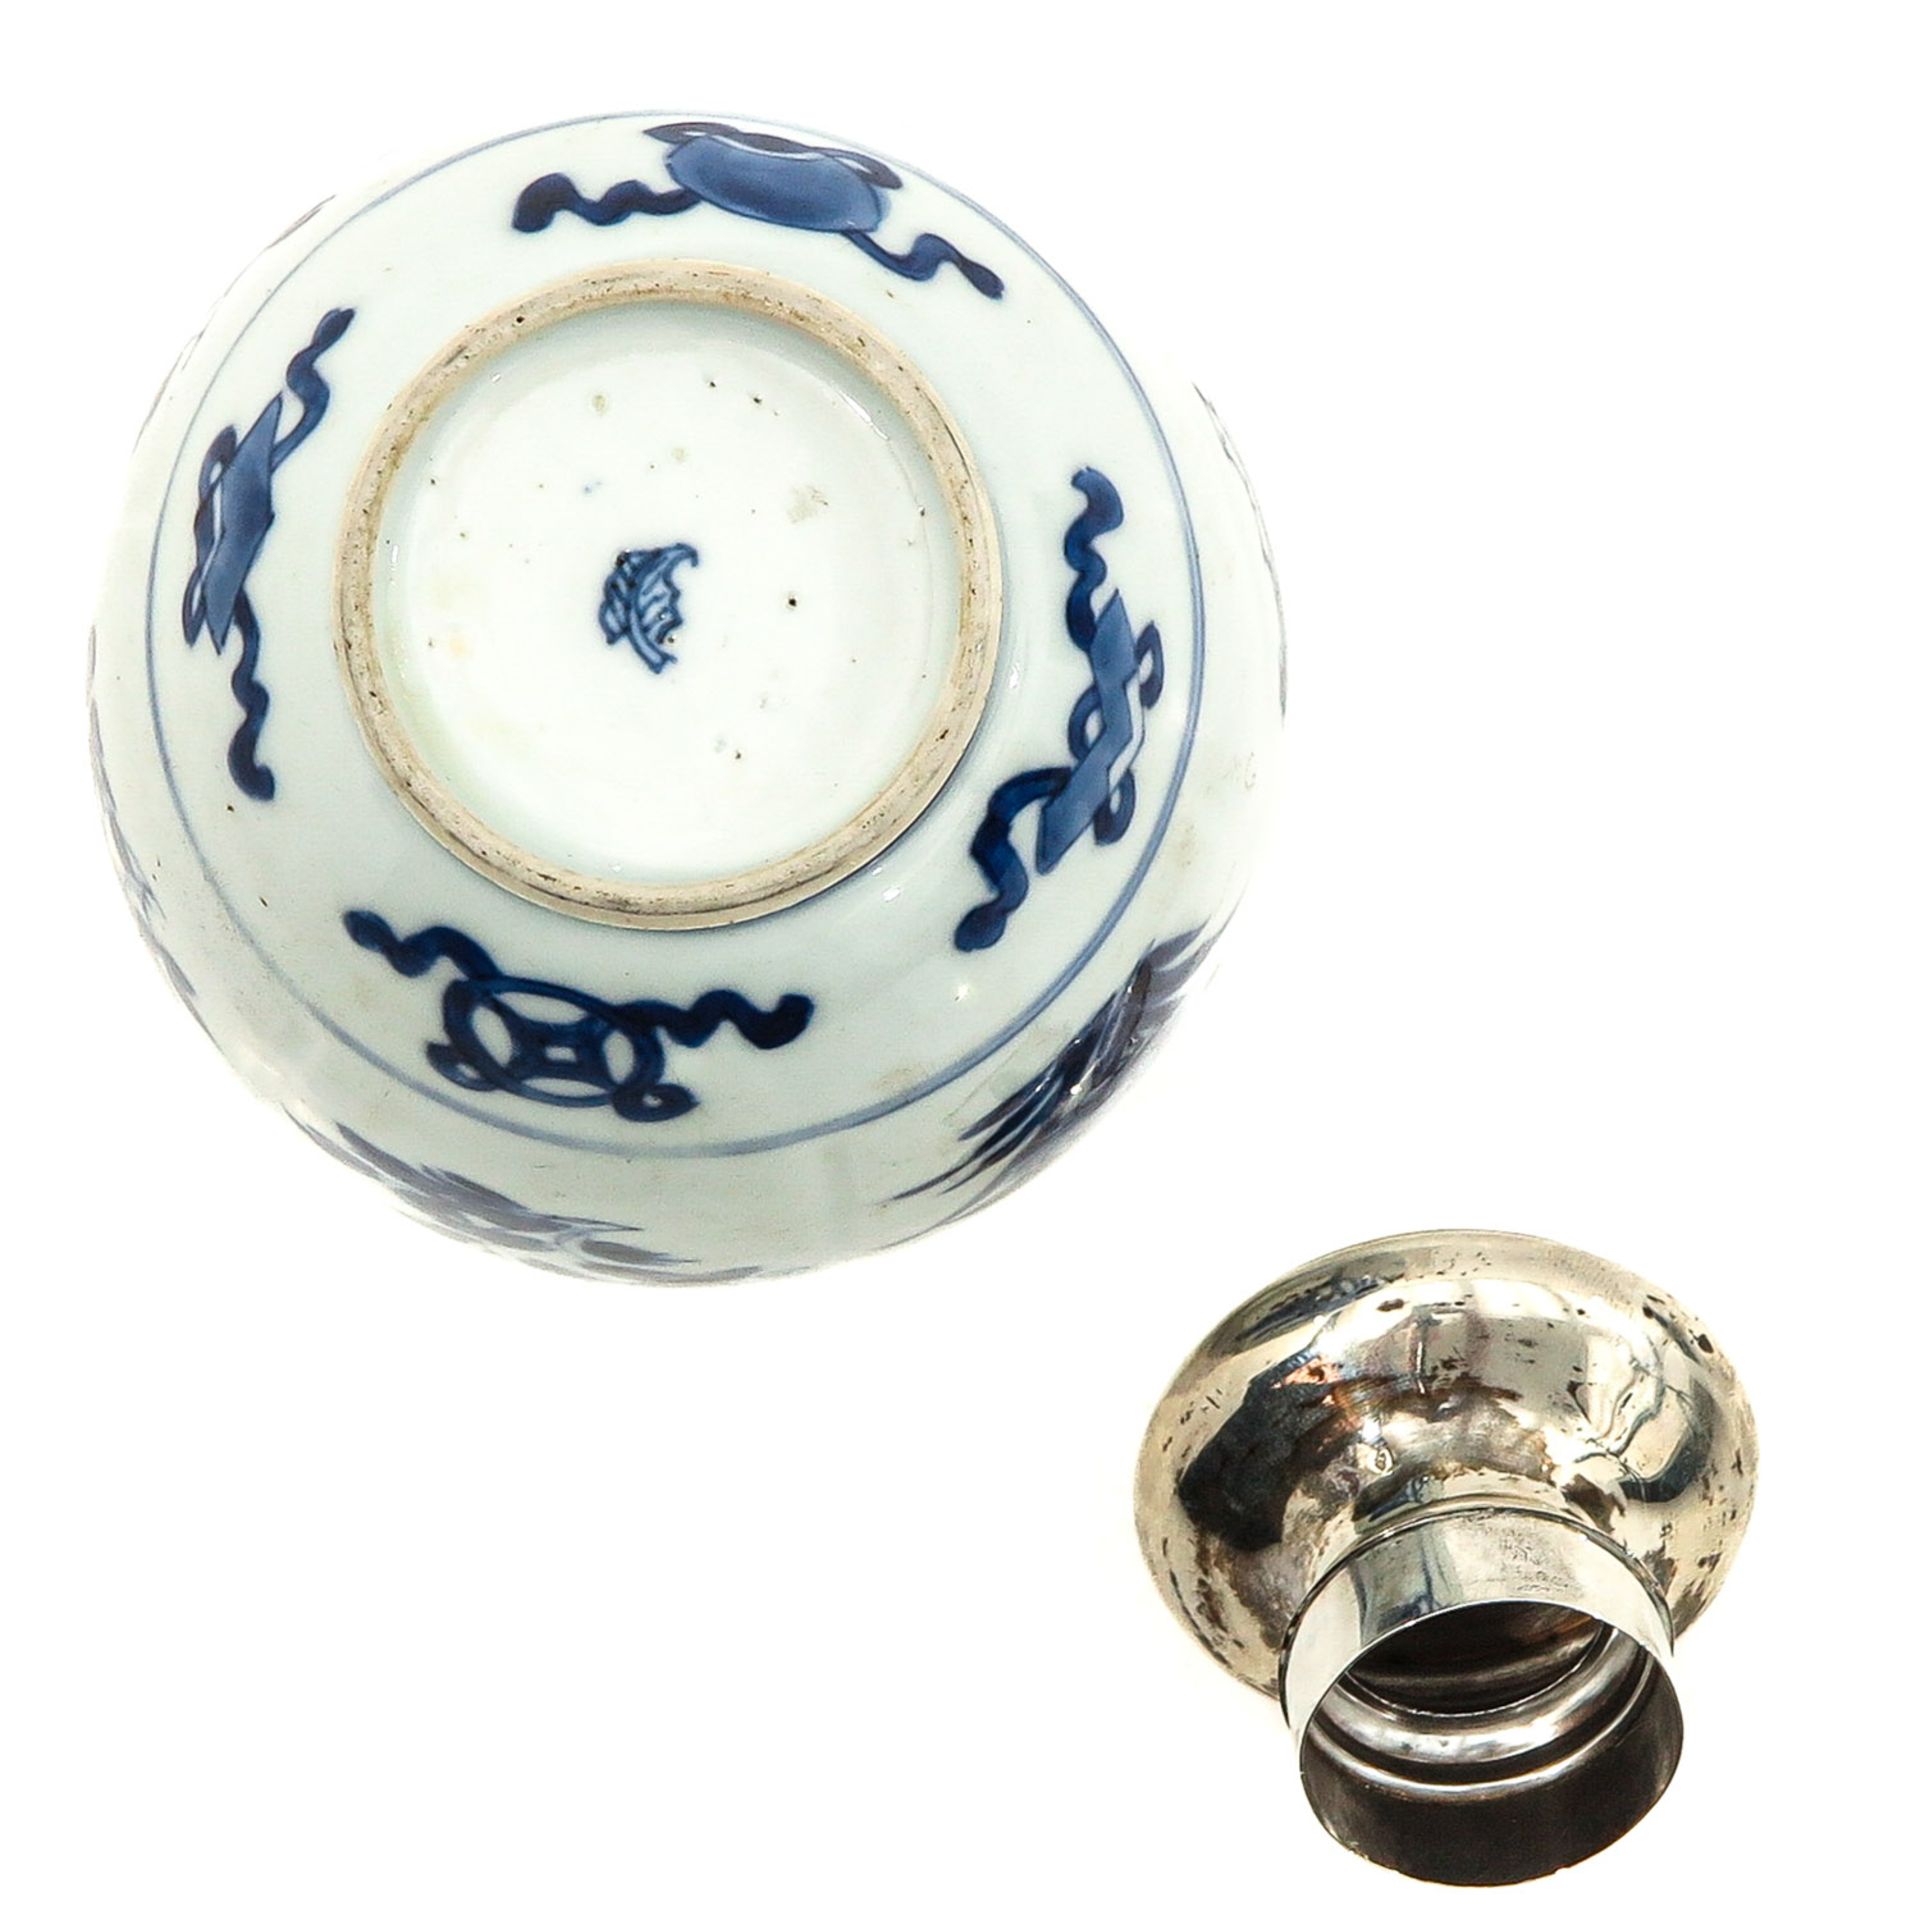 A Blue and White Tea Caddy - Image 6 of 10